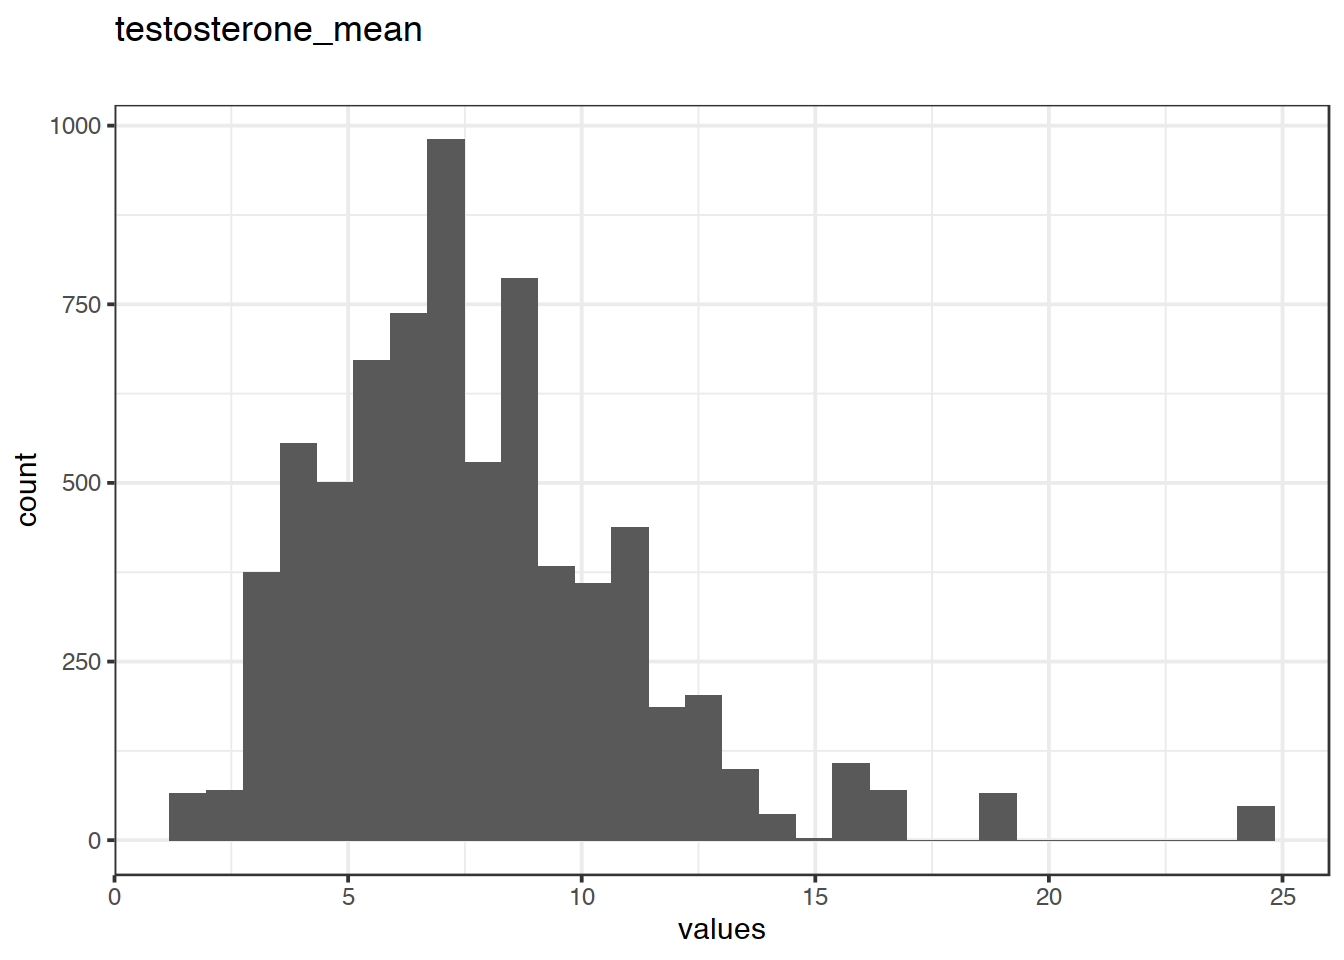 Distribution of values for testosterone_mean